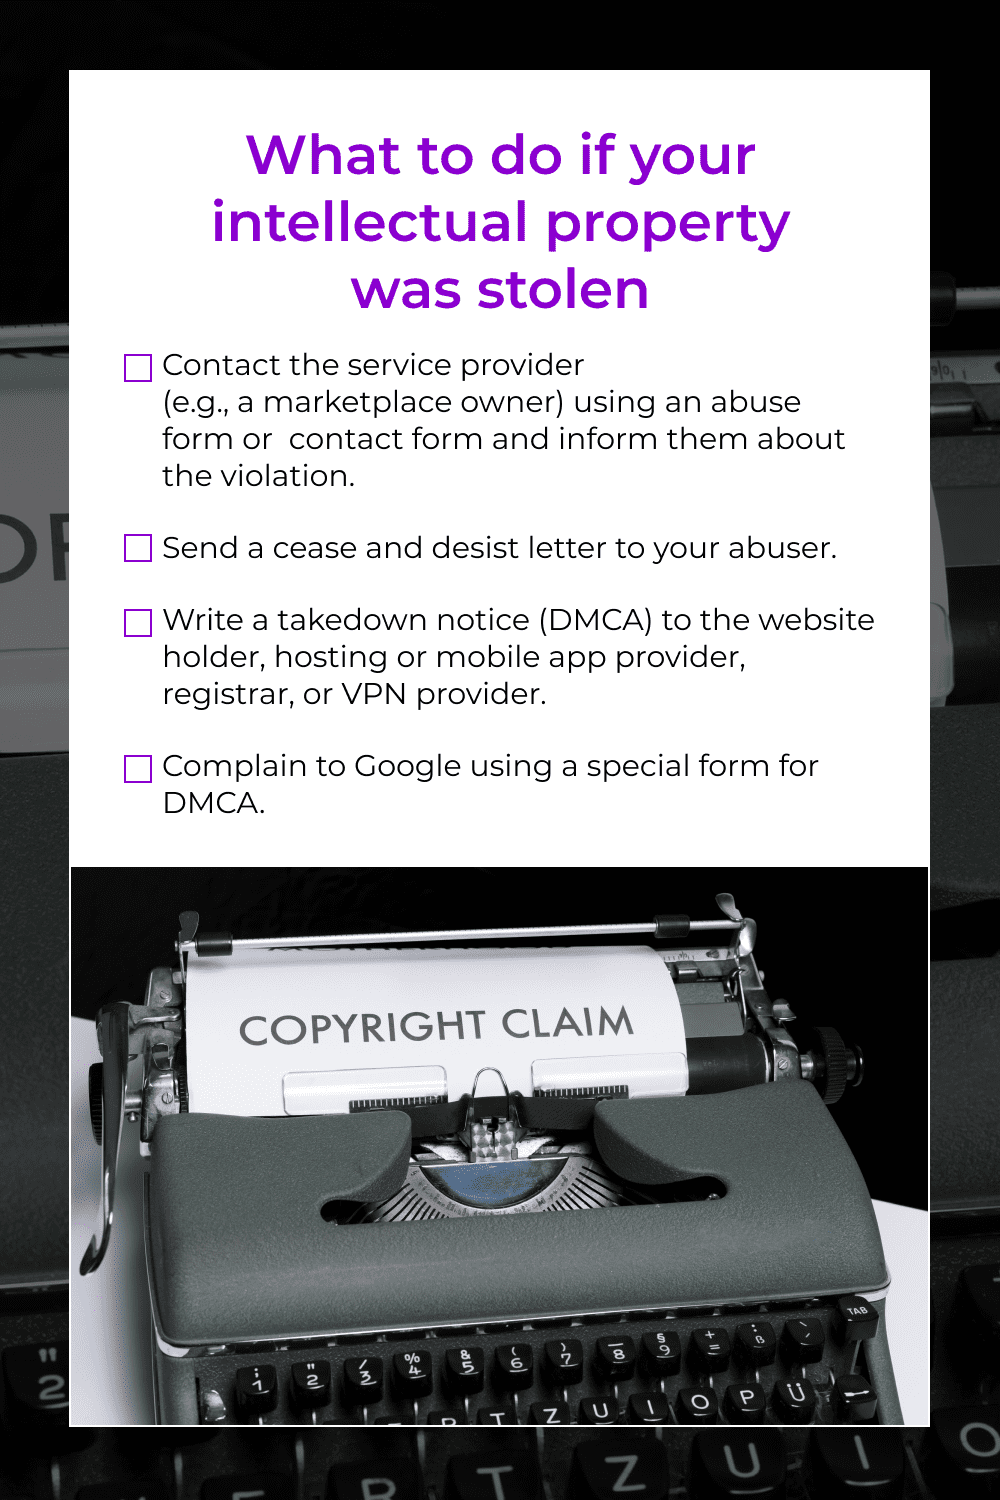 a free checklist on what to do if intellectual property was stolen.